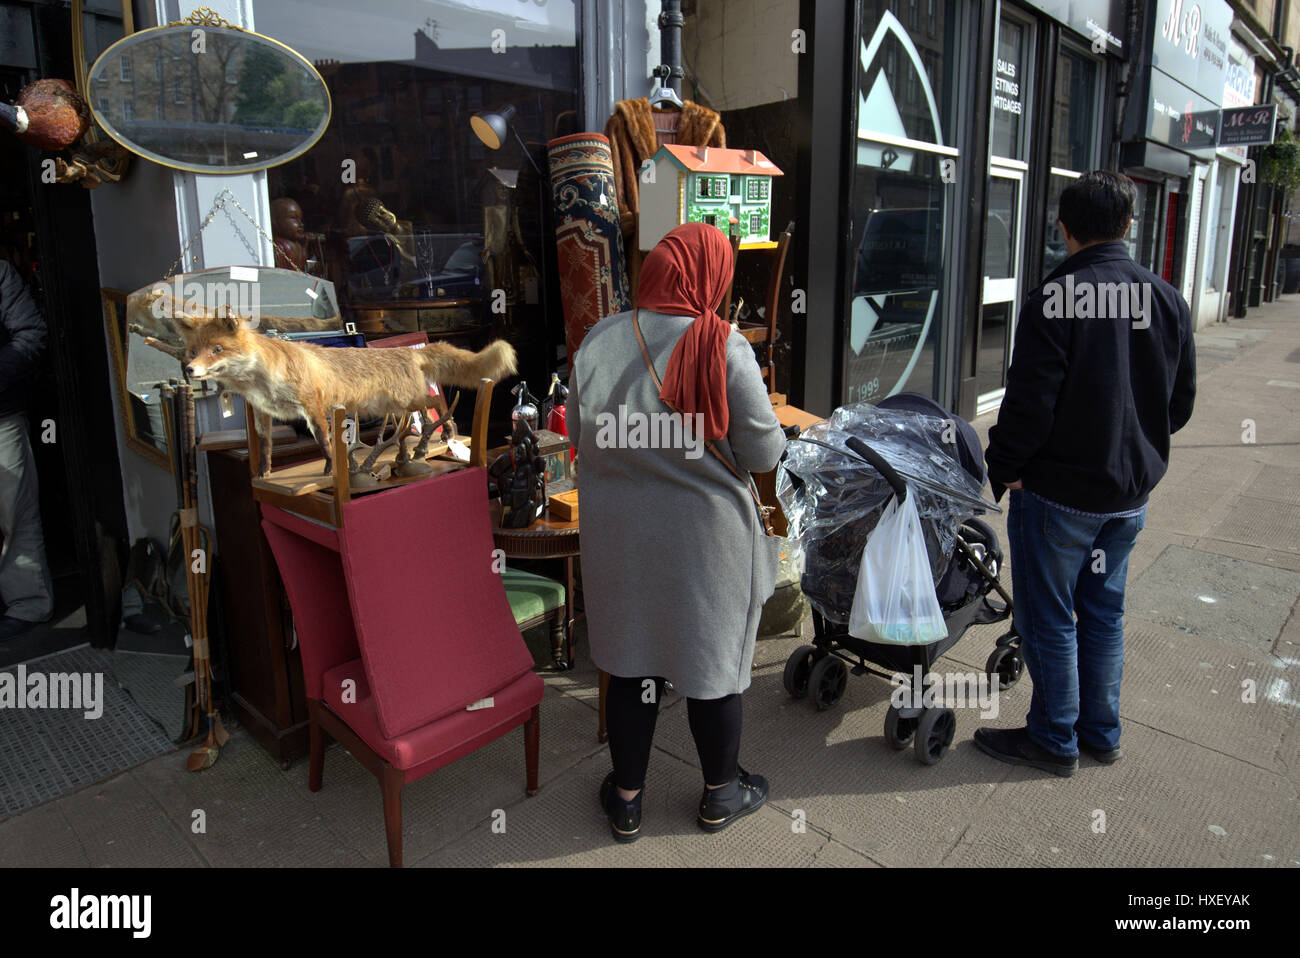 Asian family refugee dressed Hijab scarf  on street in the UK everyday scene junk shop or antique shop fox Stock Photo